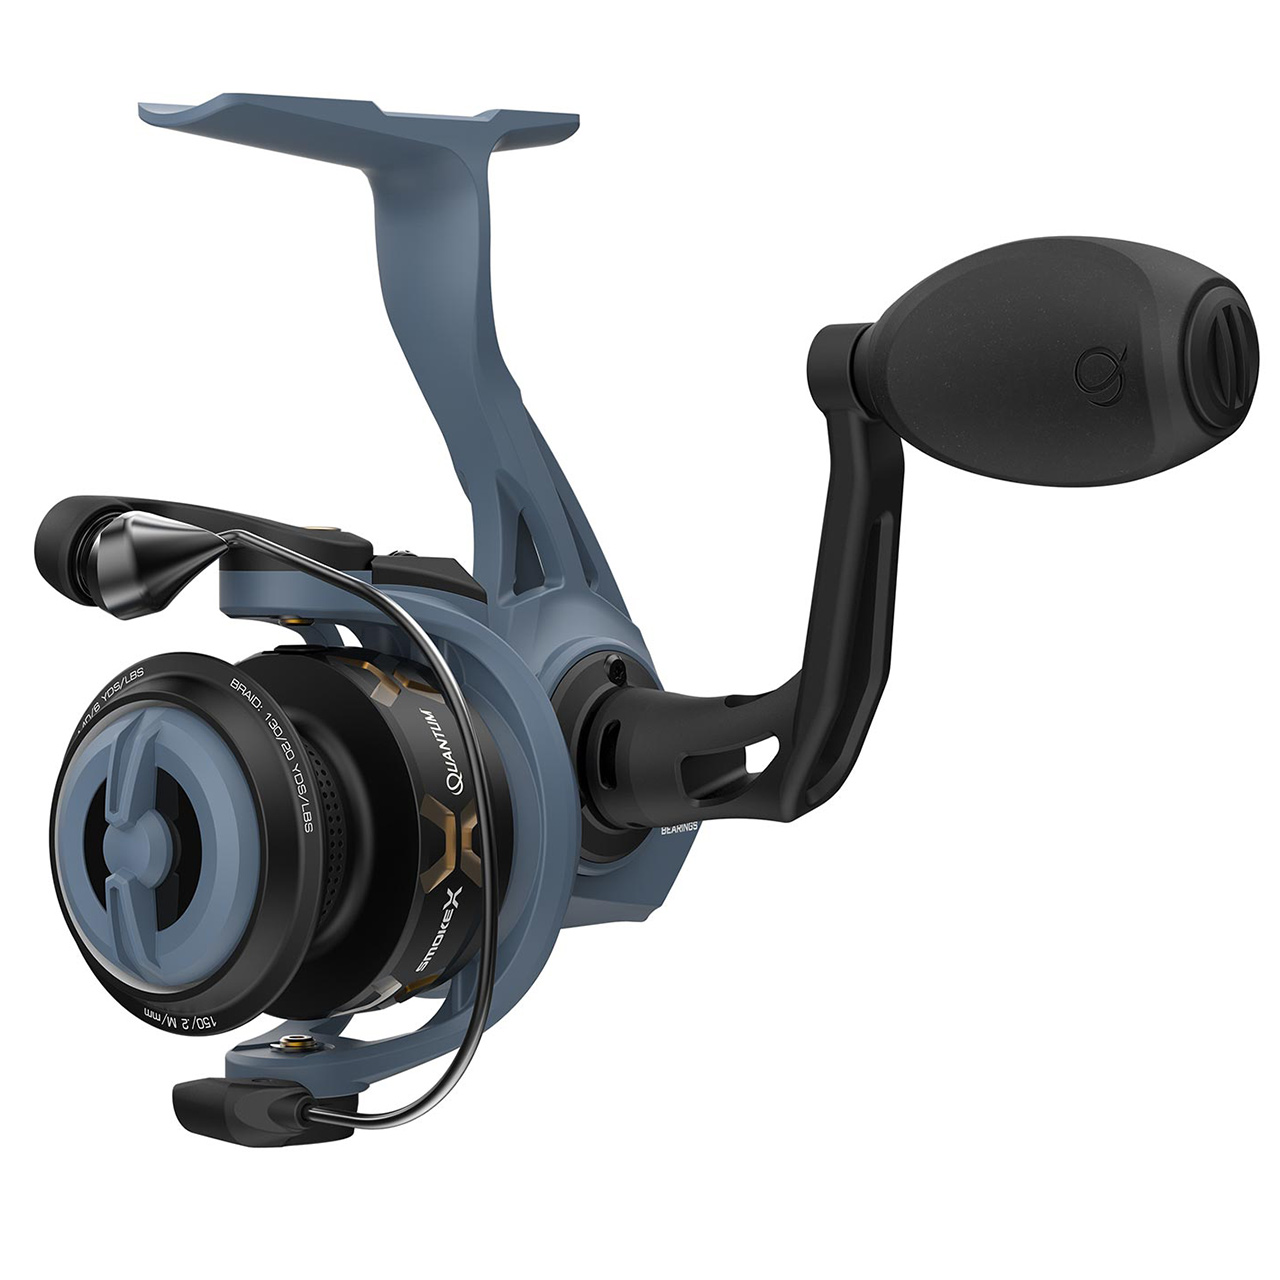 jigging reel pesca, jigging reel pesca Suppliers and Manufacturers at